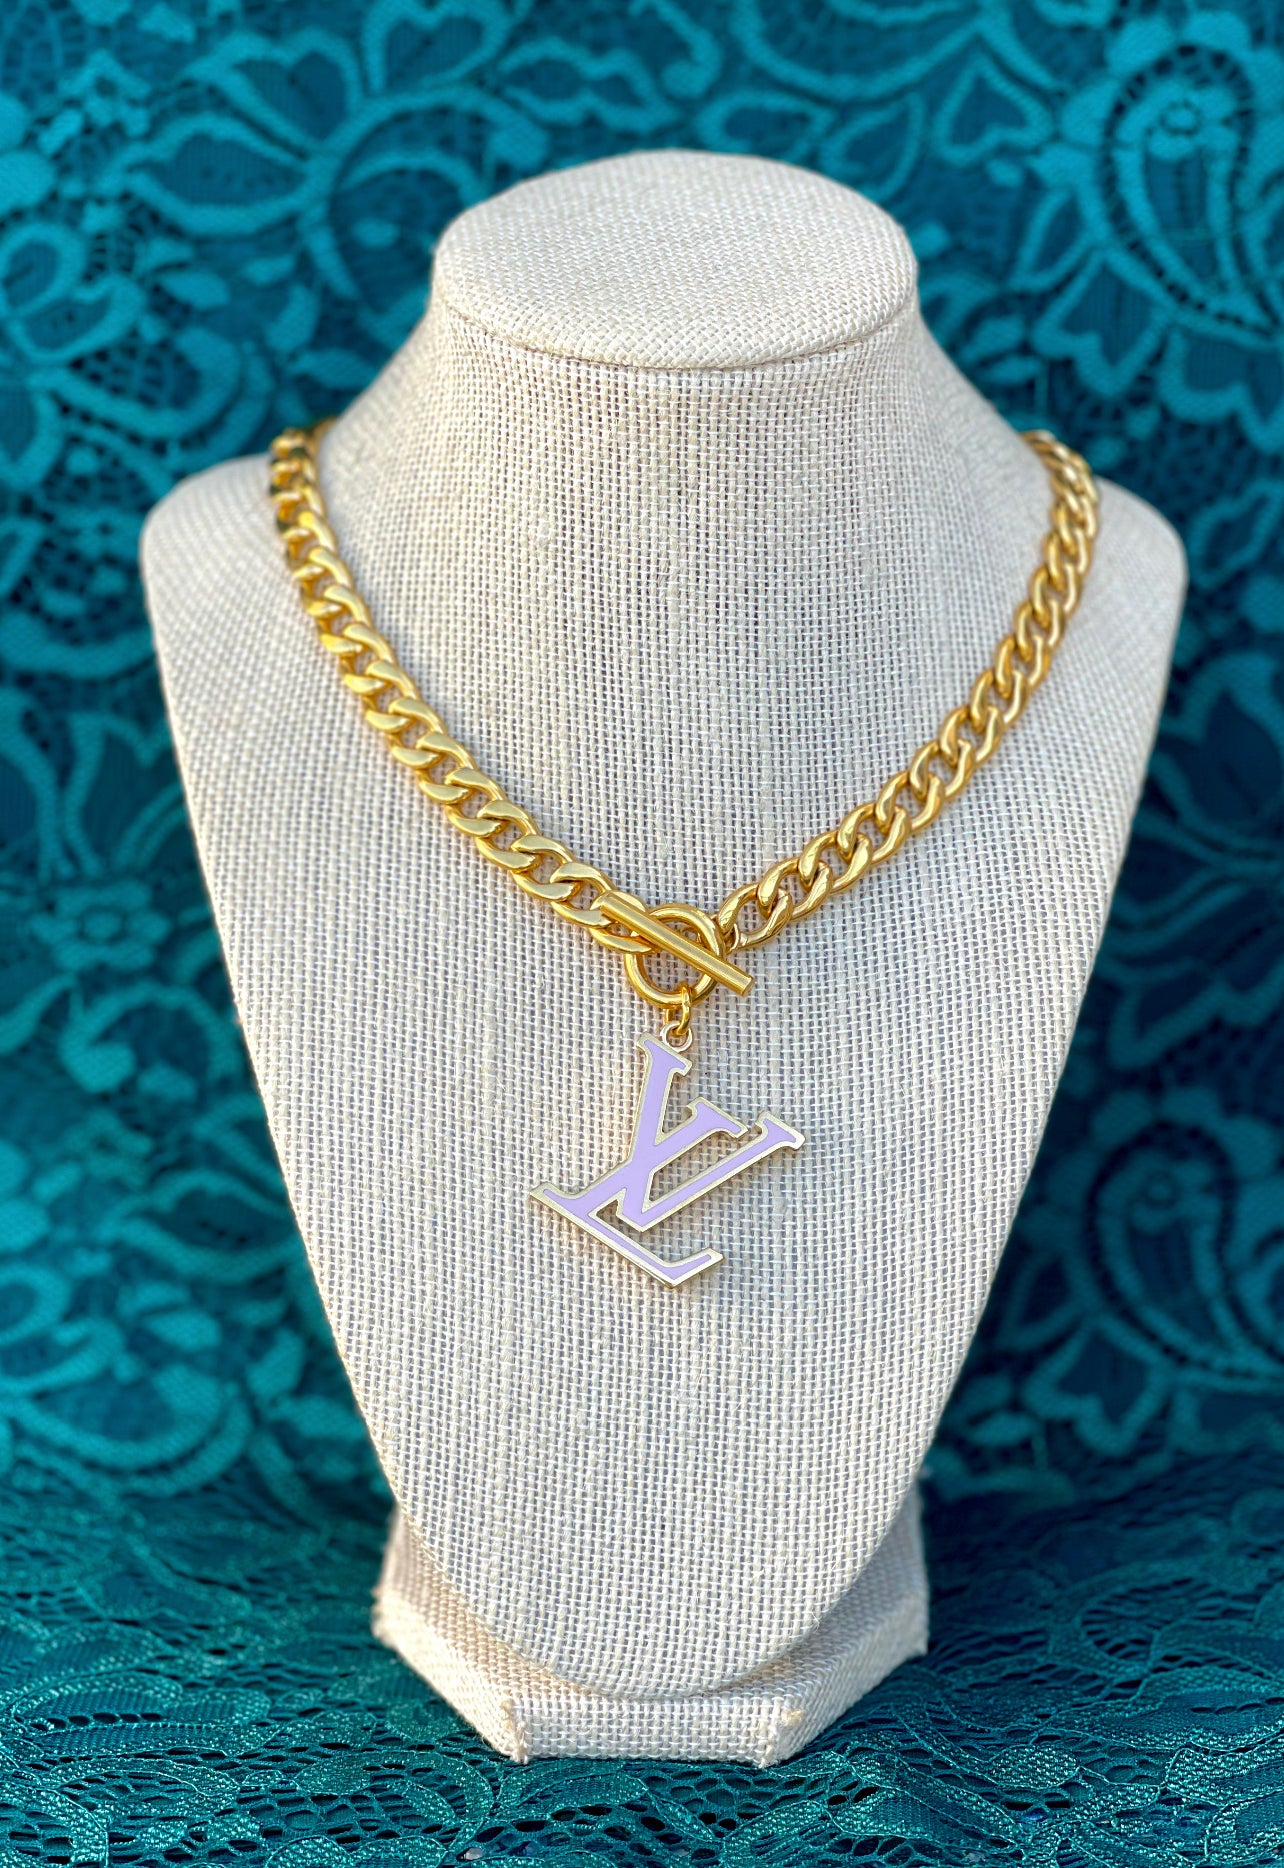 Louis Vuitton - Authenticated Necklace - Gold Plated Gold for Women, Good Condition